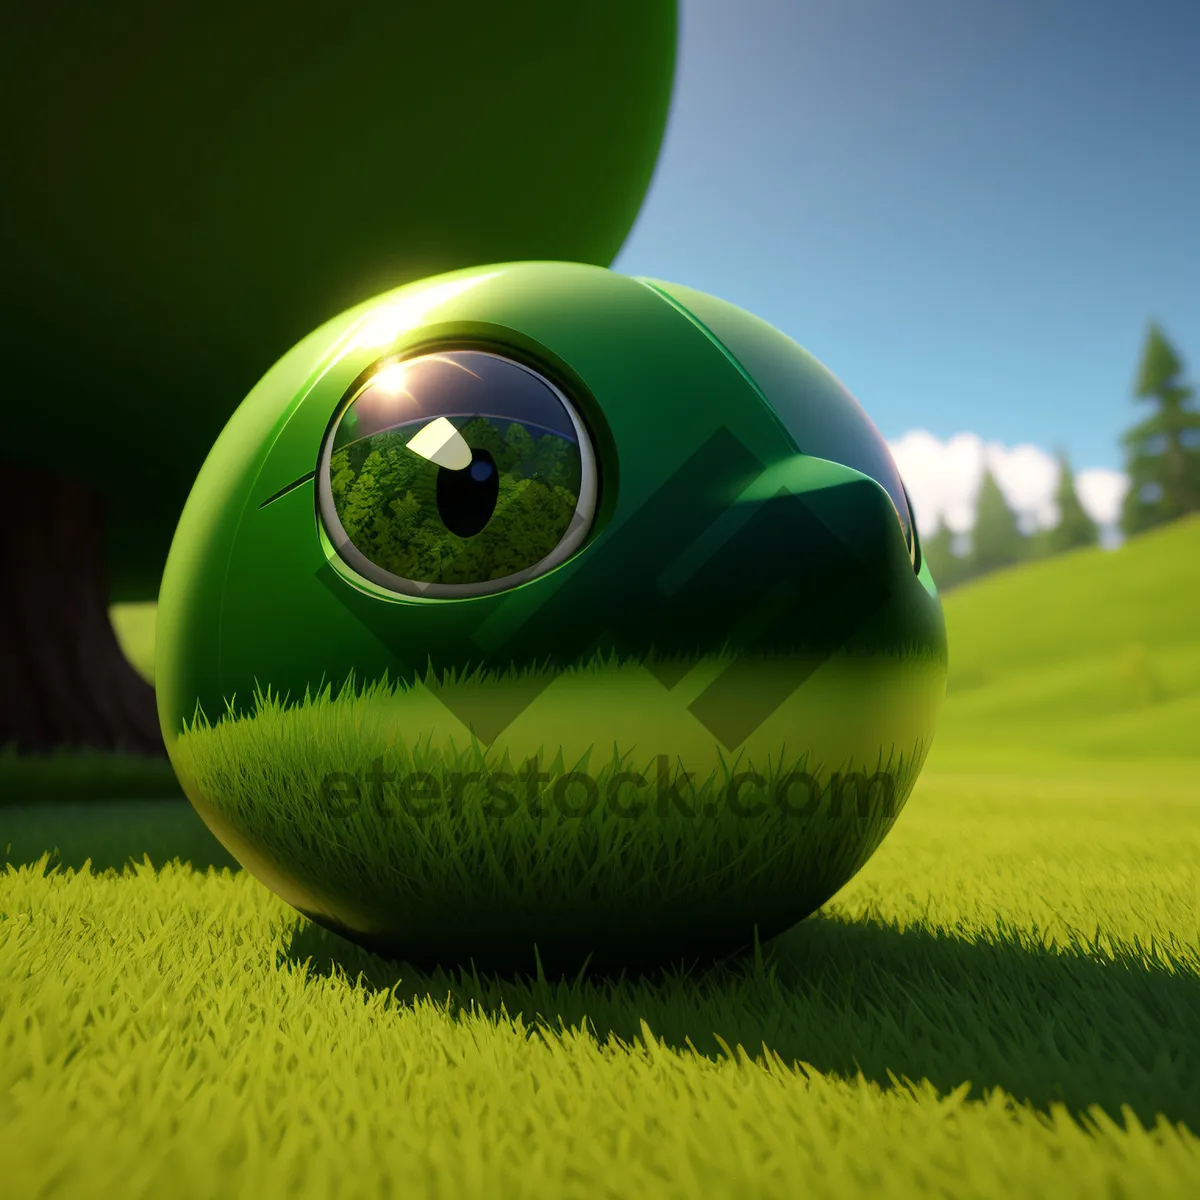 Picture of Ball on Green: Golfing Fun on the Course